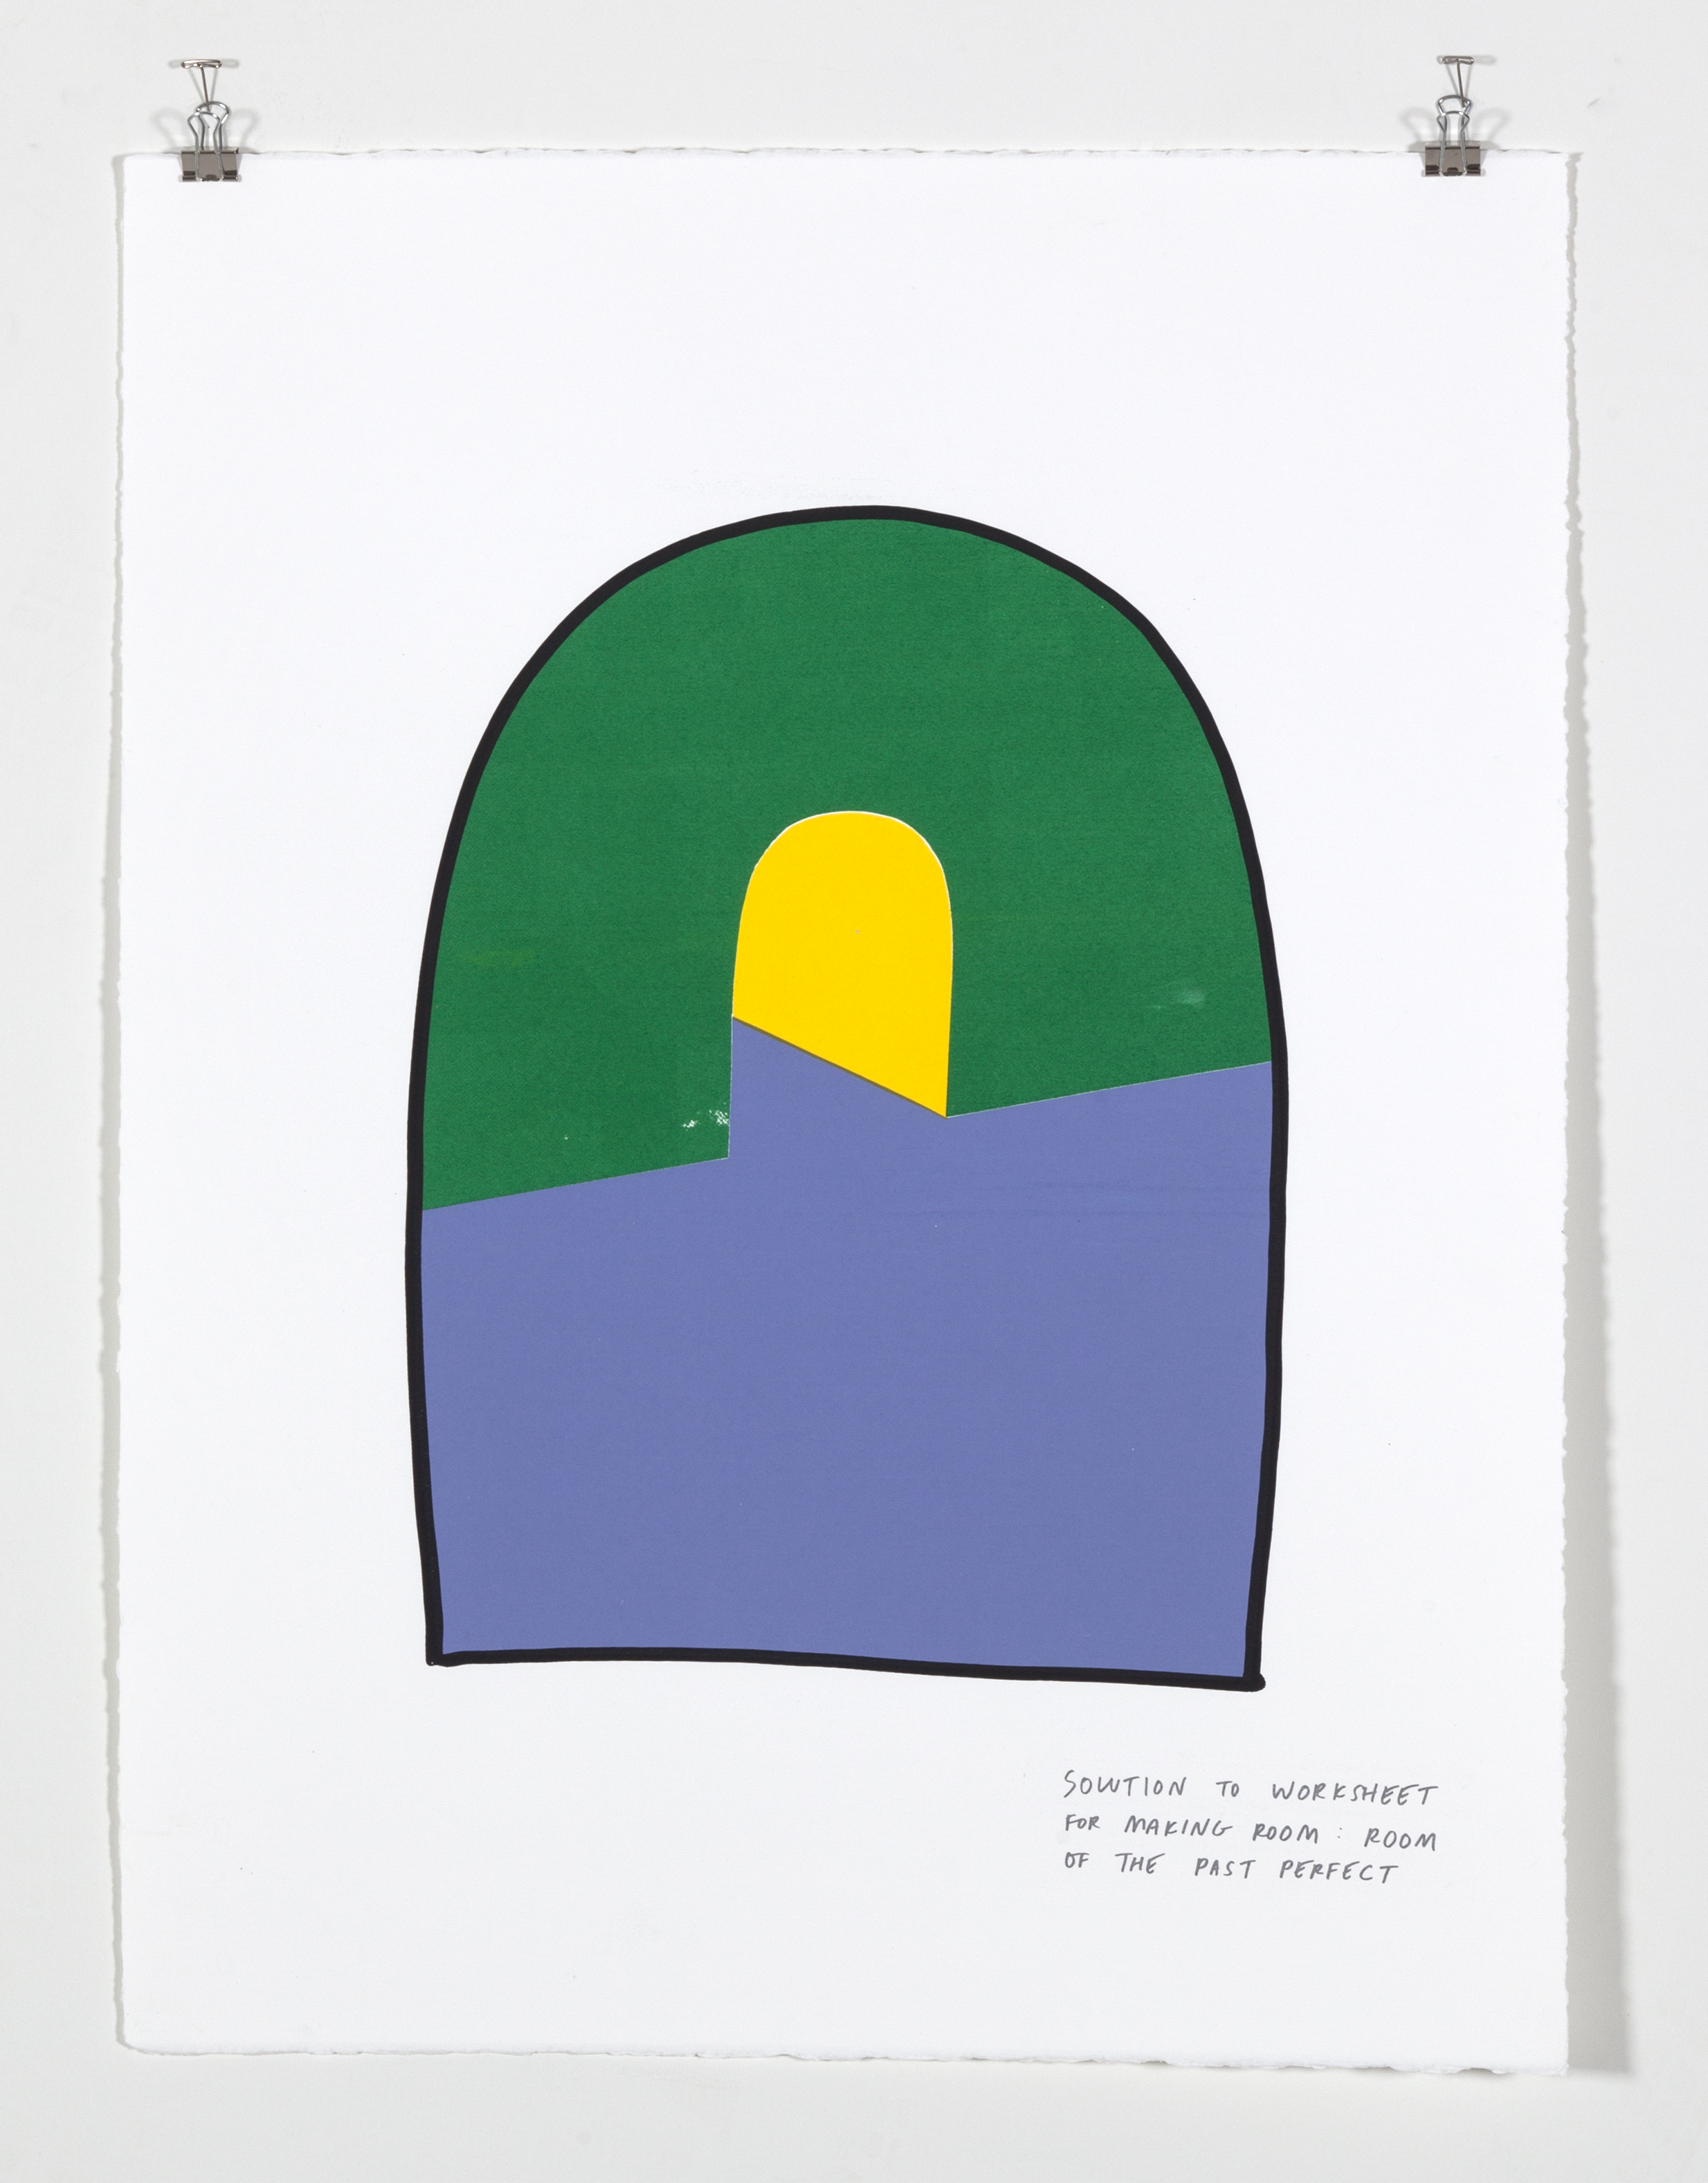    Solution to Worksheet for Making Room: Room of the Past Perfect,  2018  Five color silkscreen print on paper 19 7/8 x 25 7/8 inches 